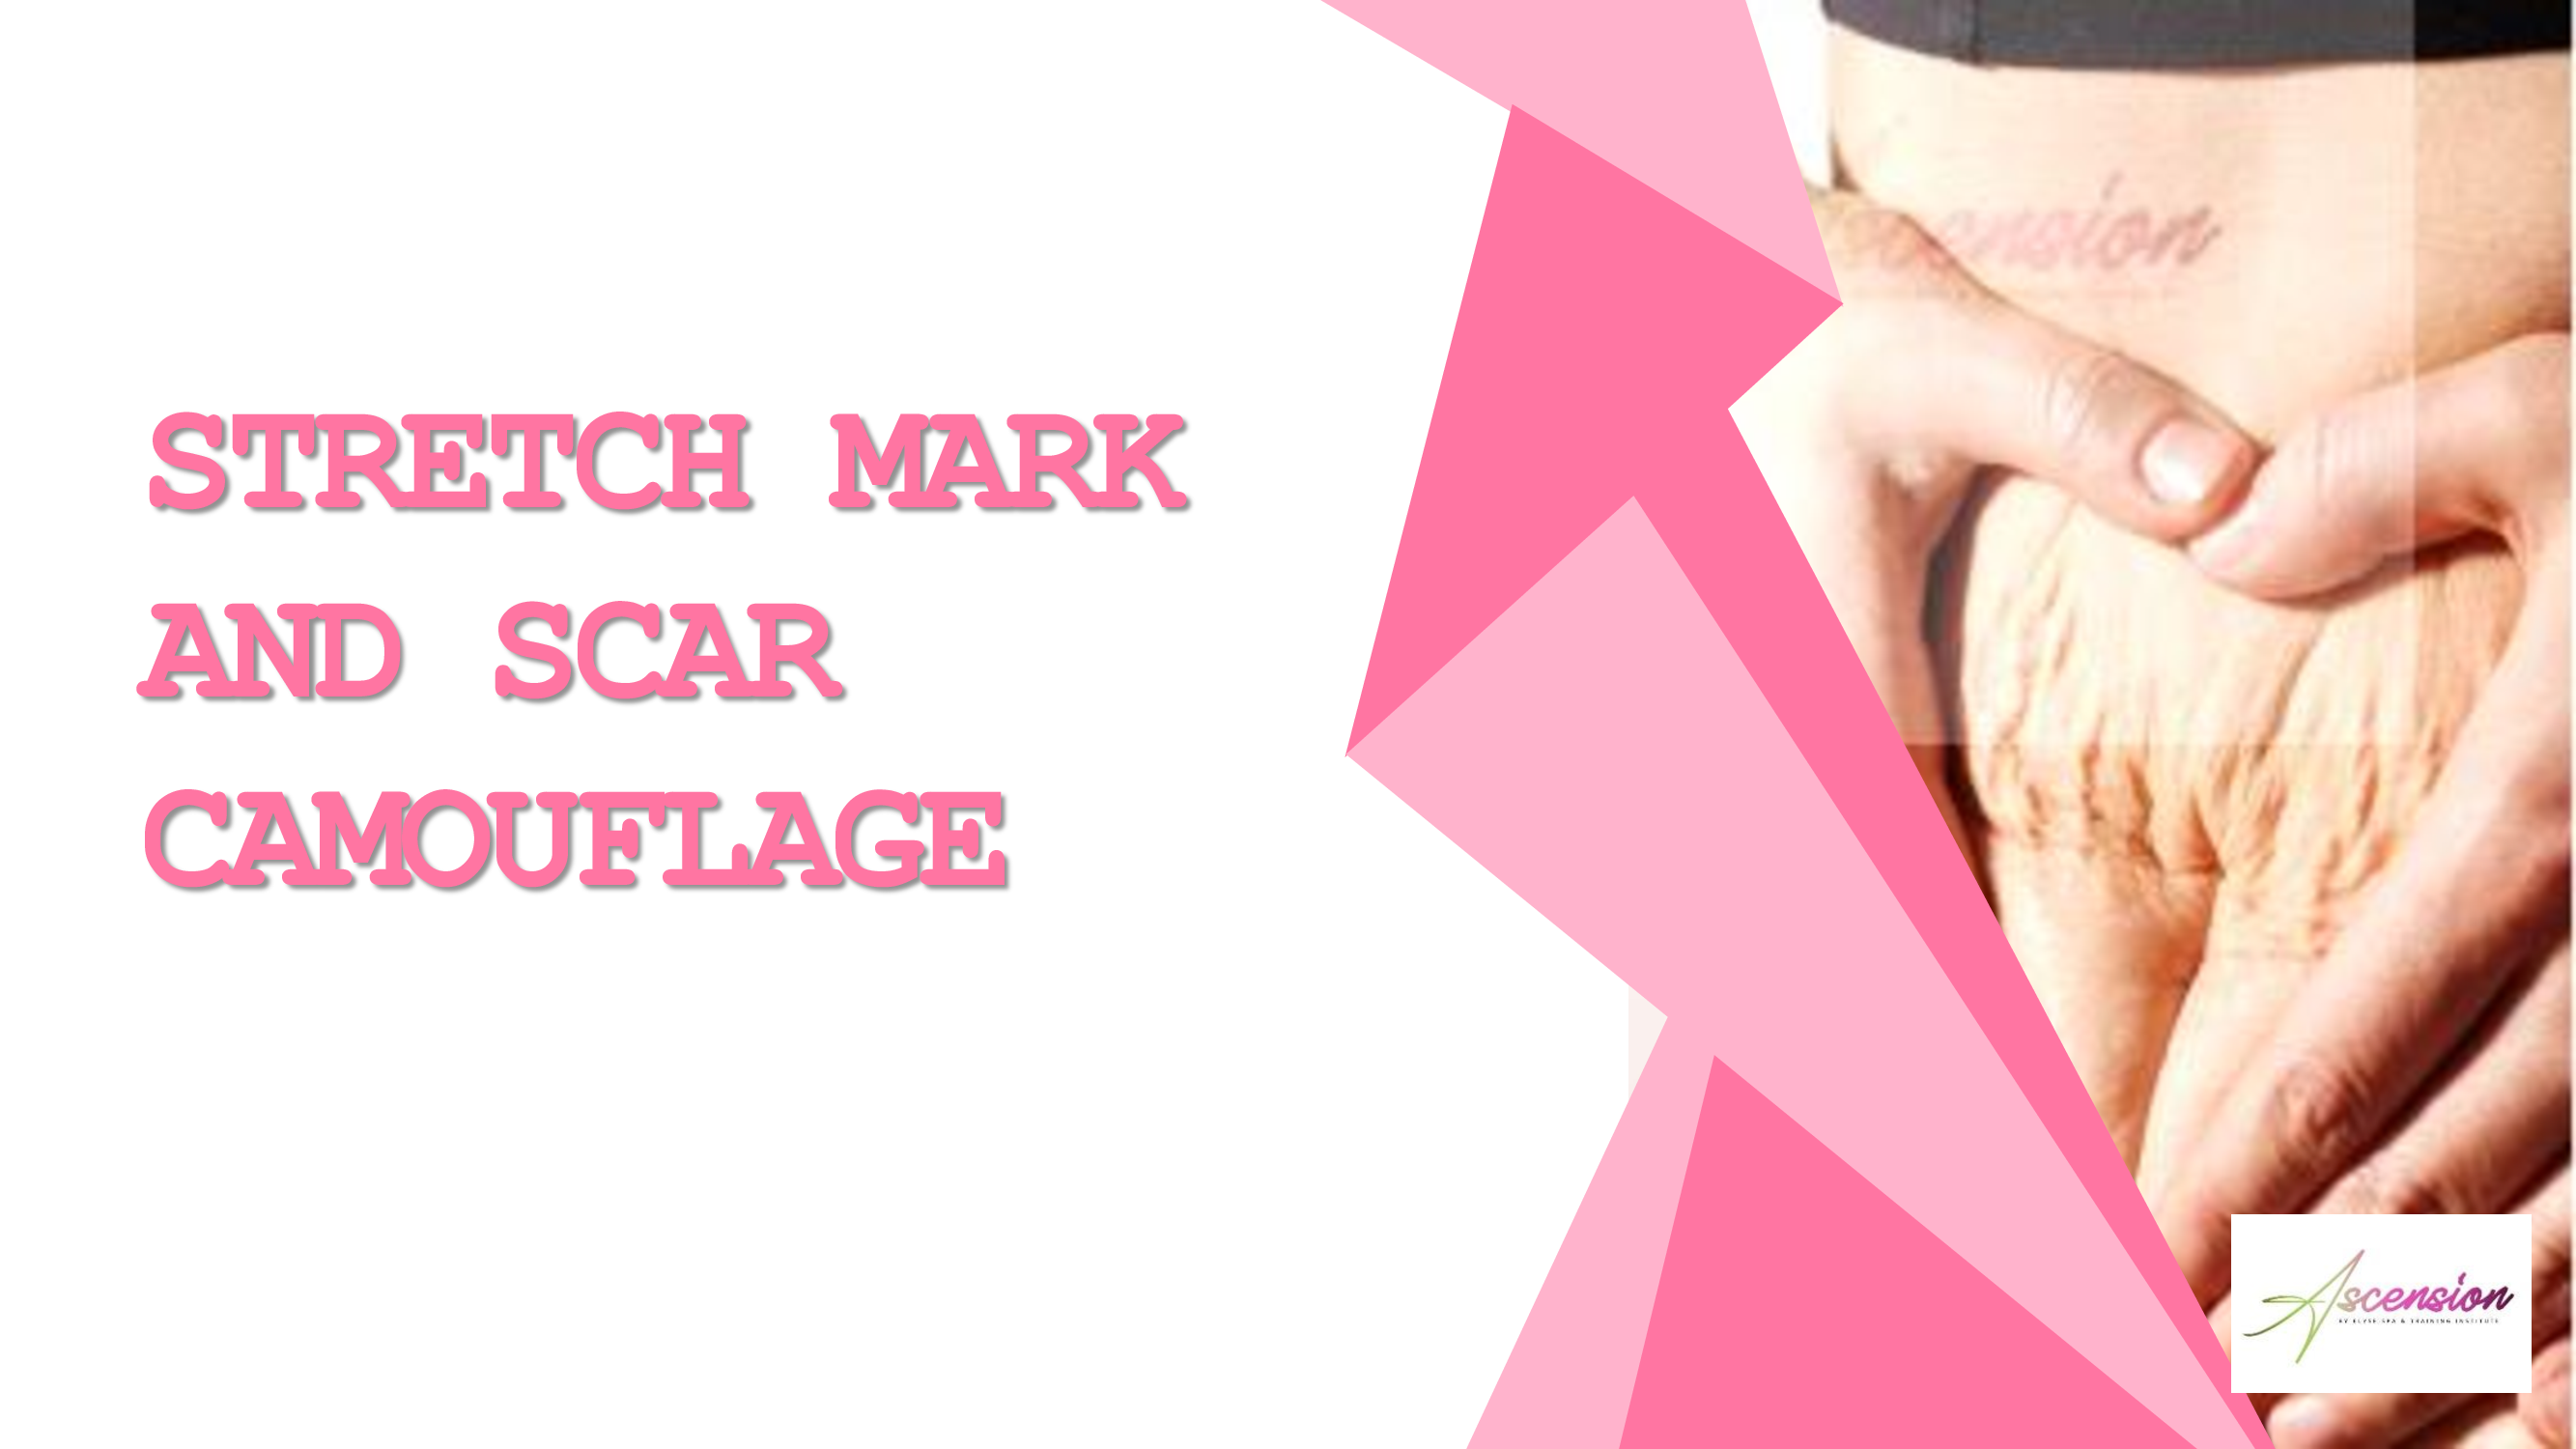 Stretch Mark and Scar Camouflage